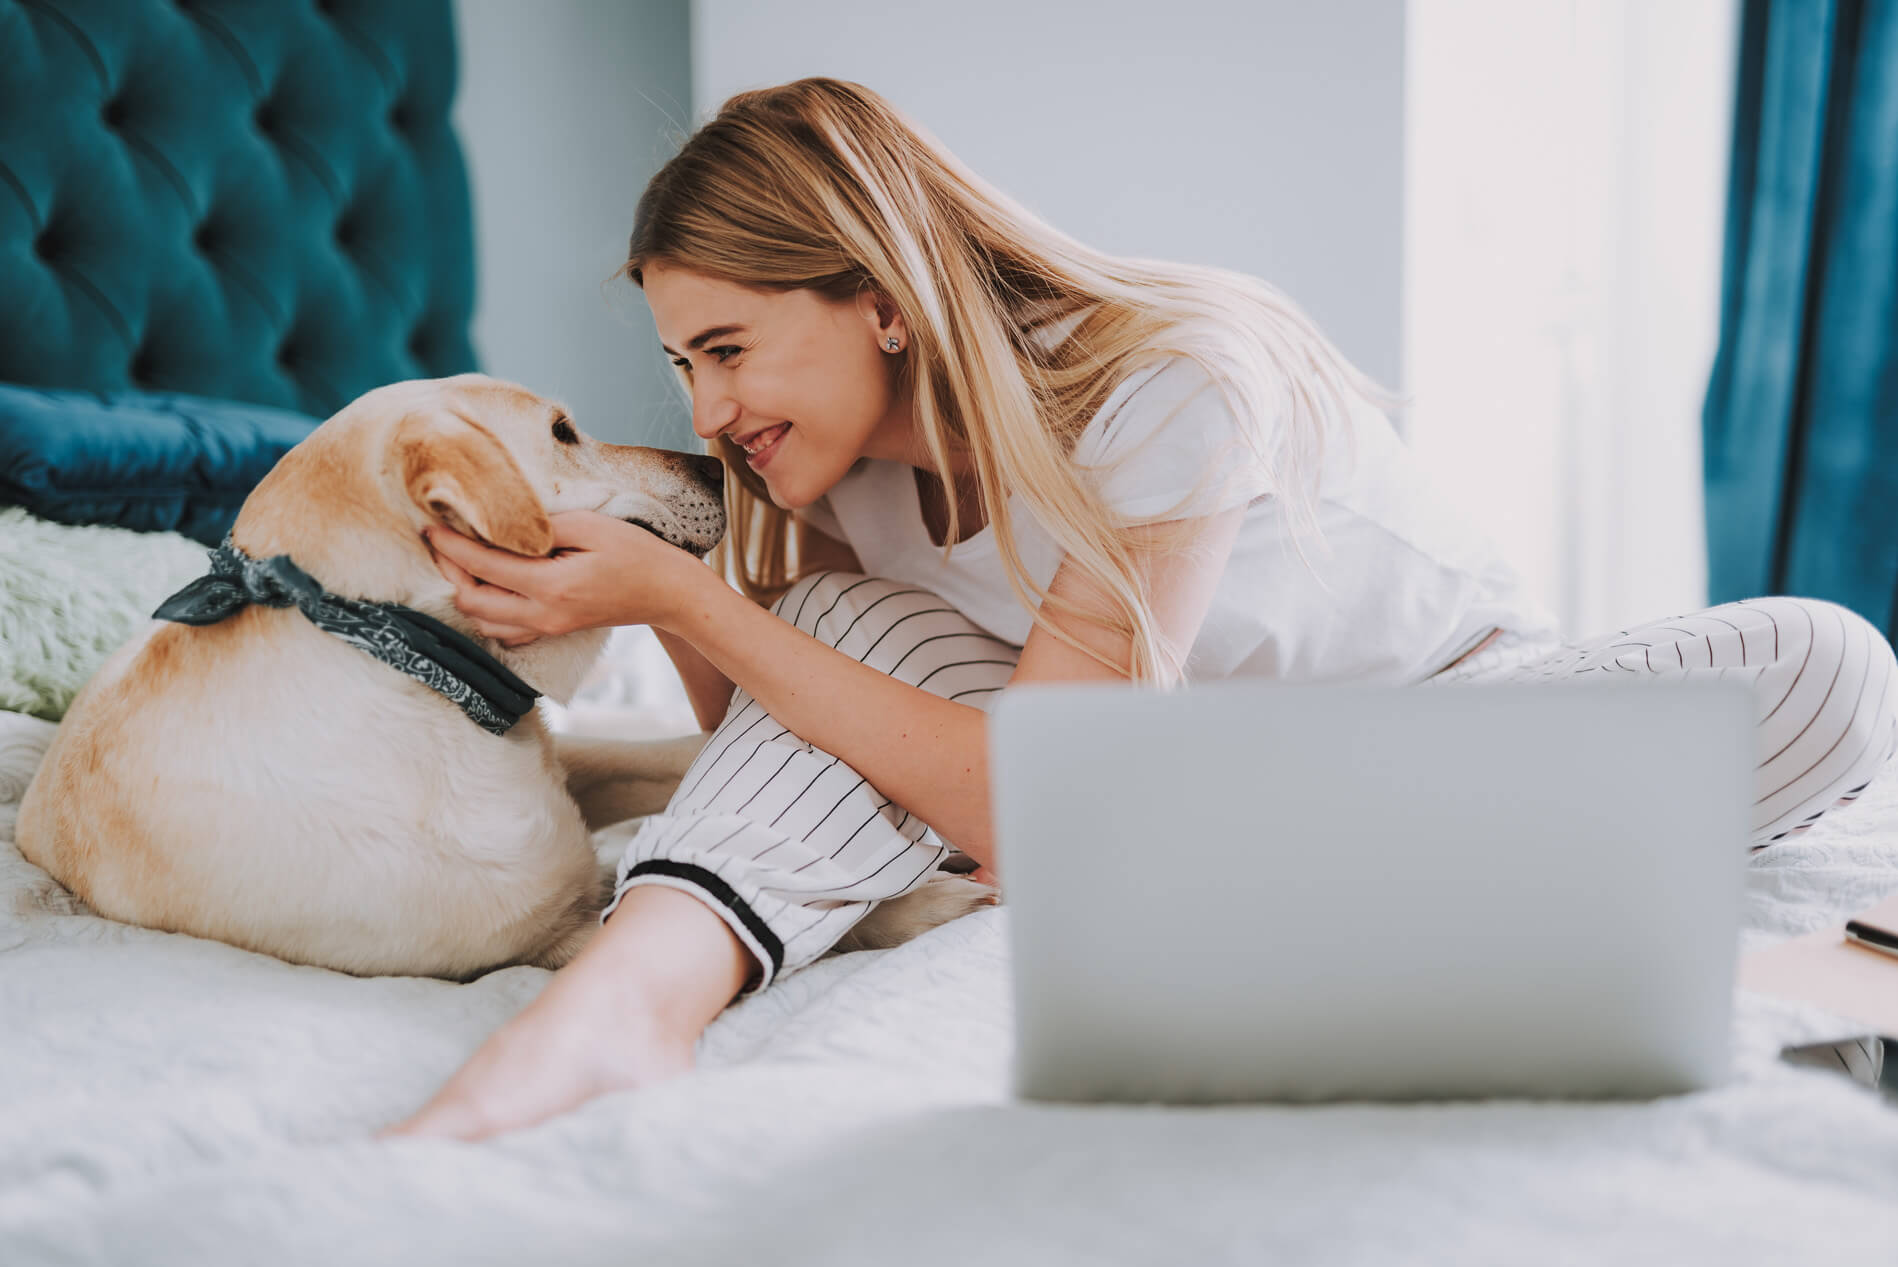 Woman sitting on the bed kissing a dog